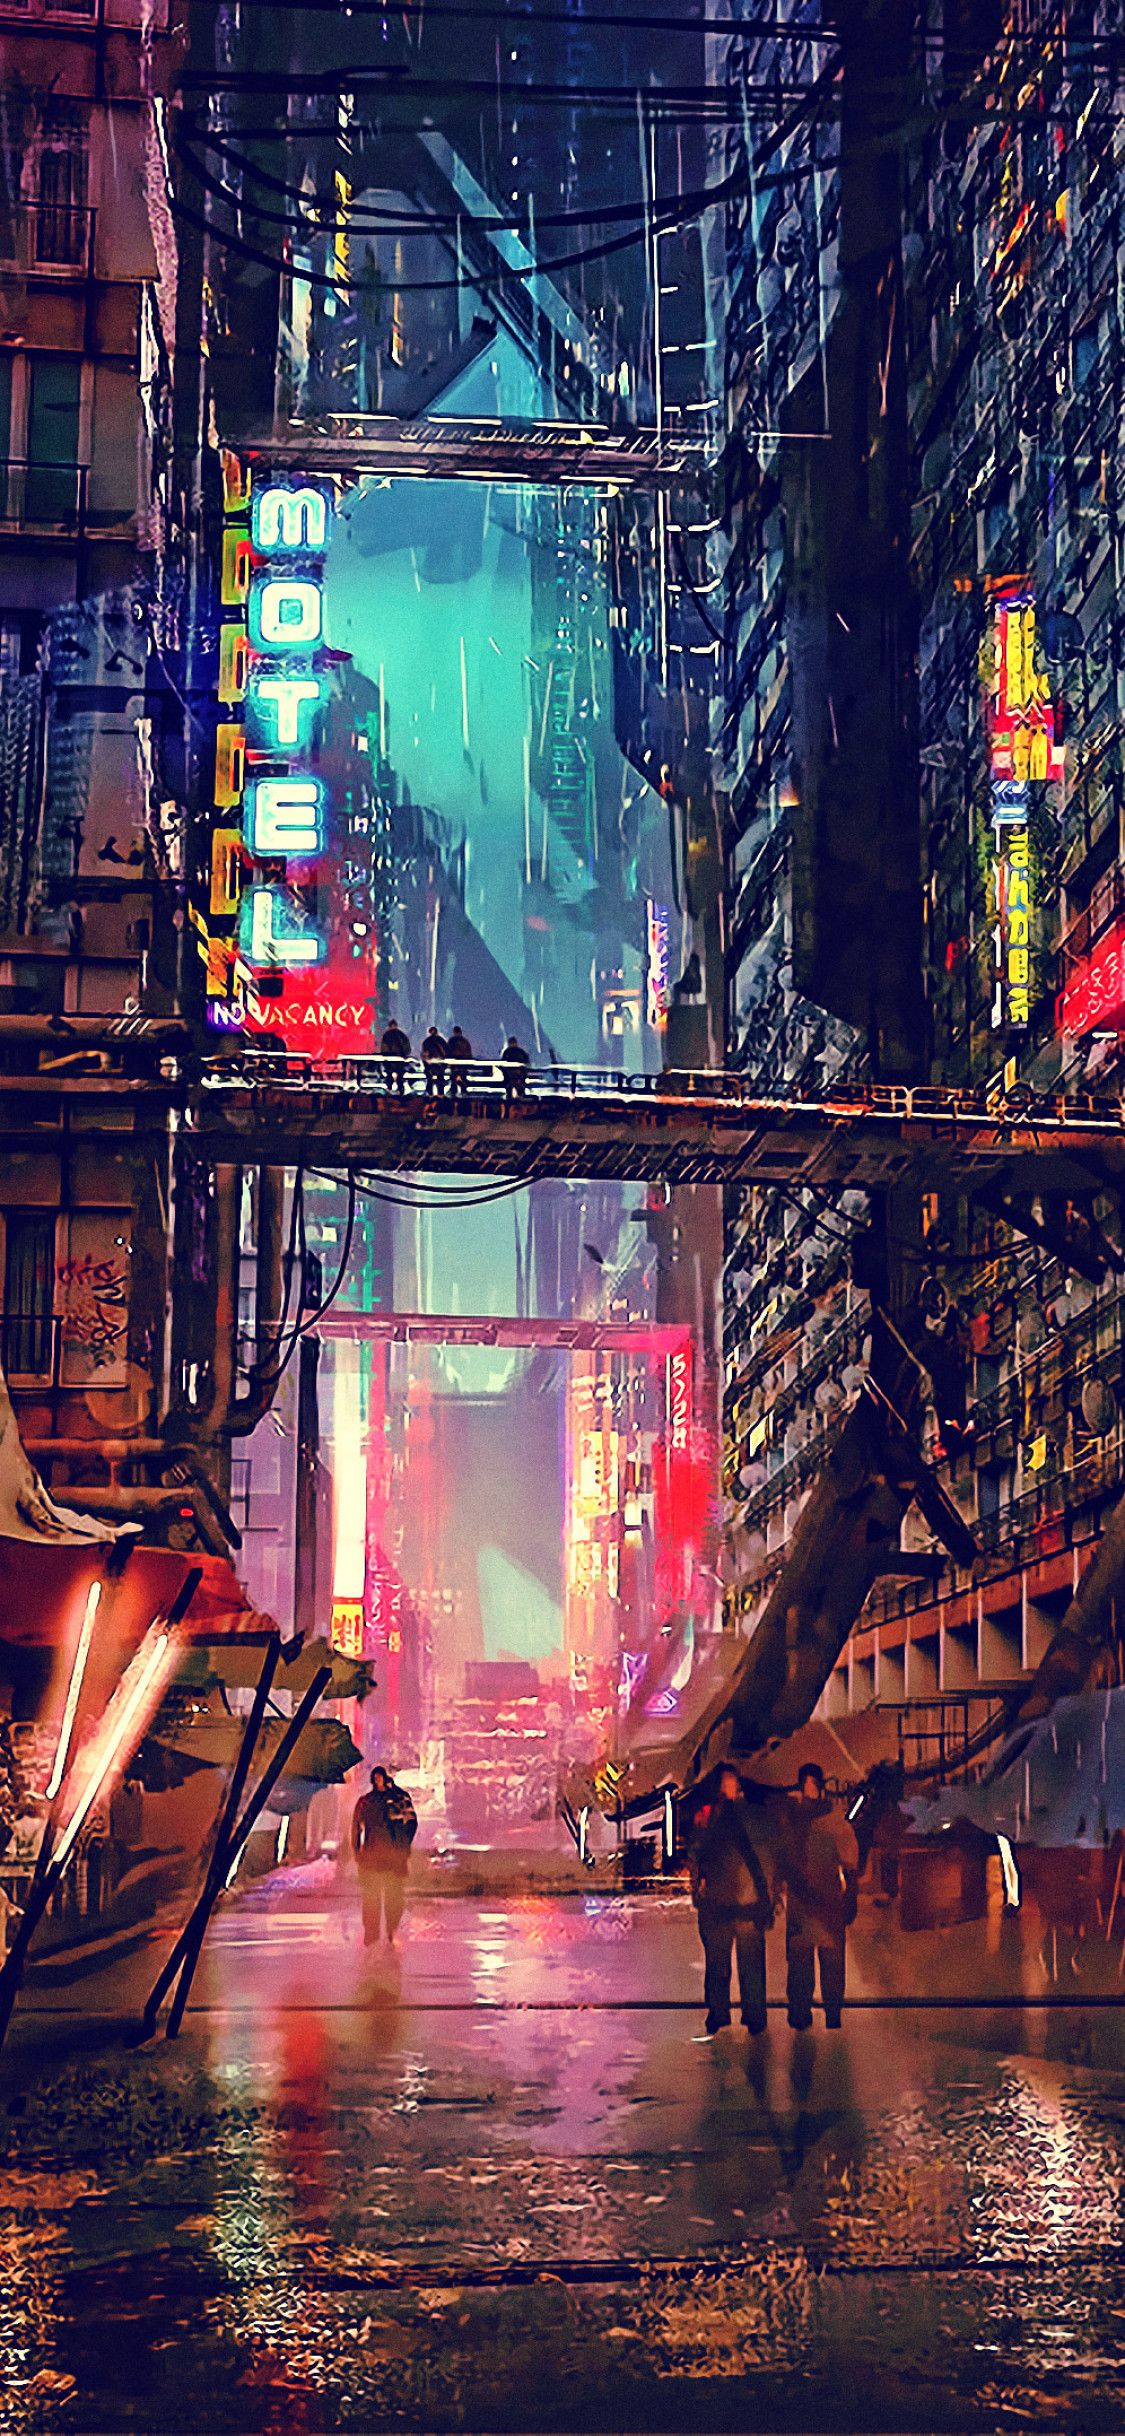 Cyberpunk City Android Wallpapers - Wallpaper Cave - 1125 x 2436 jpeg 689kB